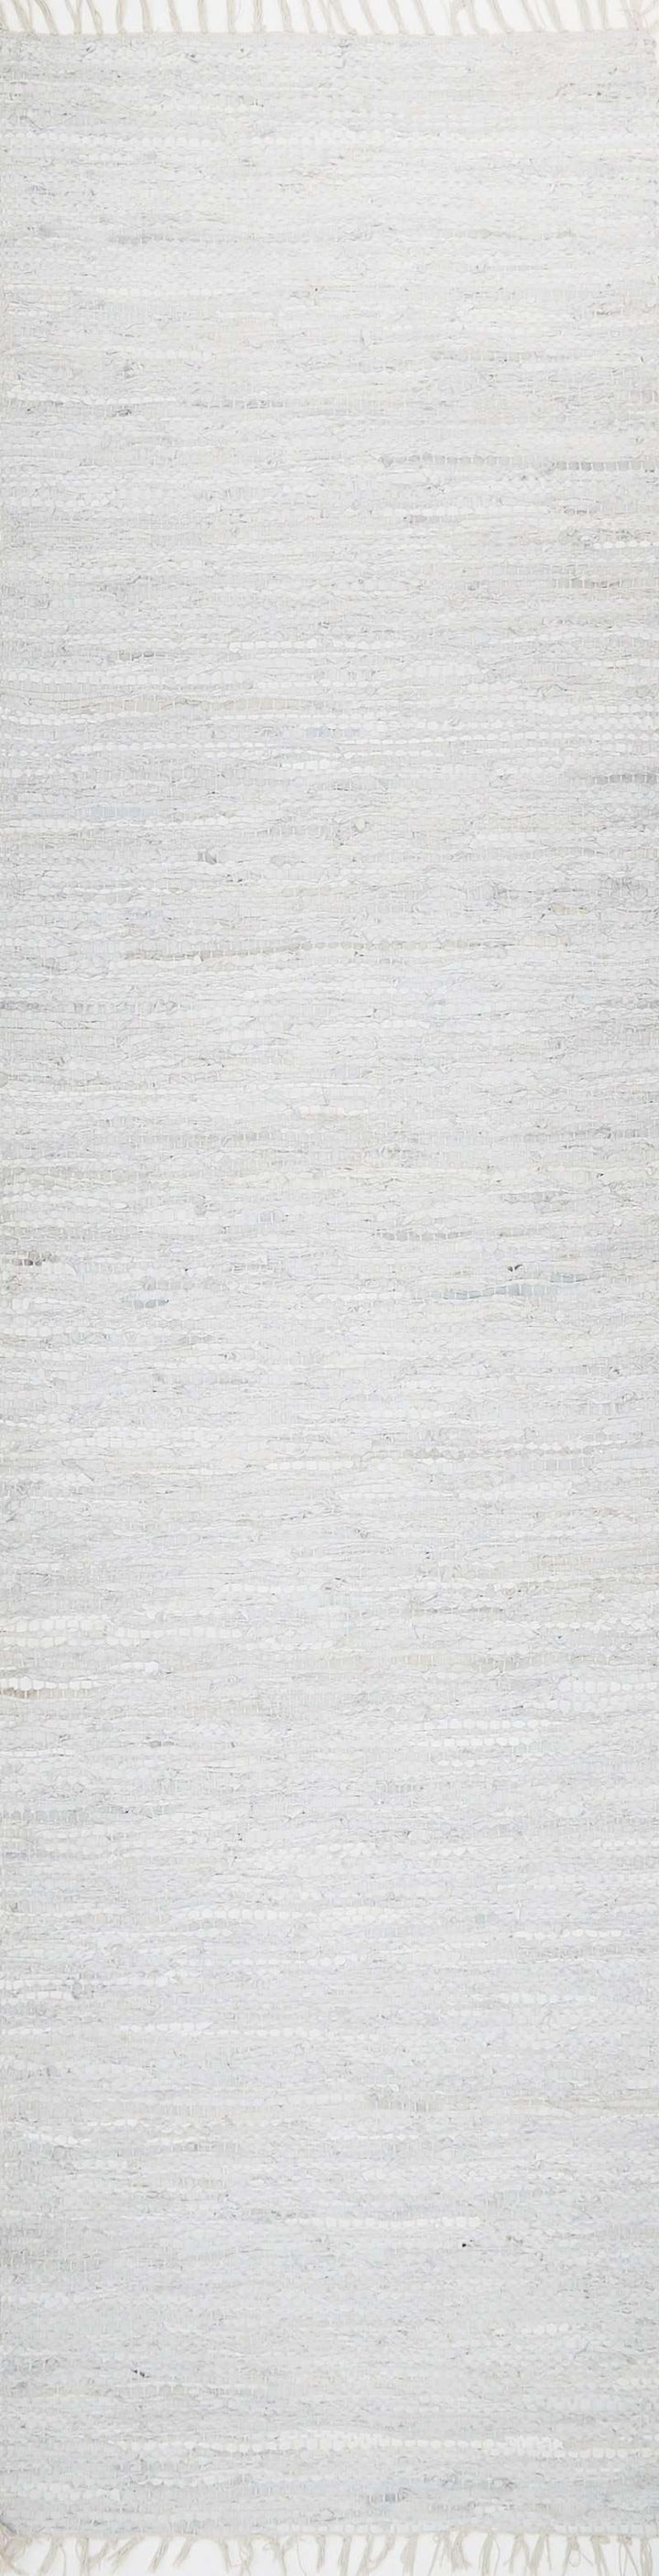 Nordic Modern White Leather Rug, [cheapest rugs online], [au rugs], [rugs australia]